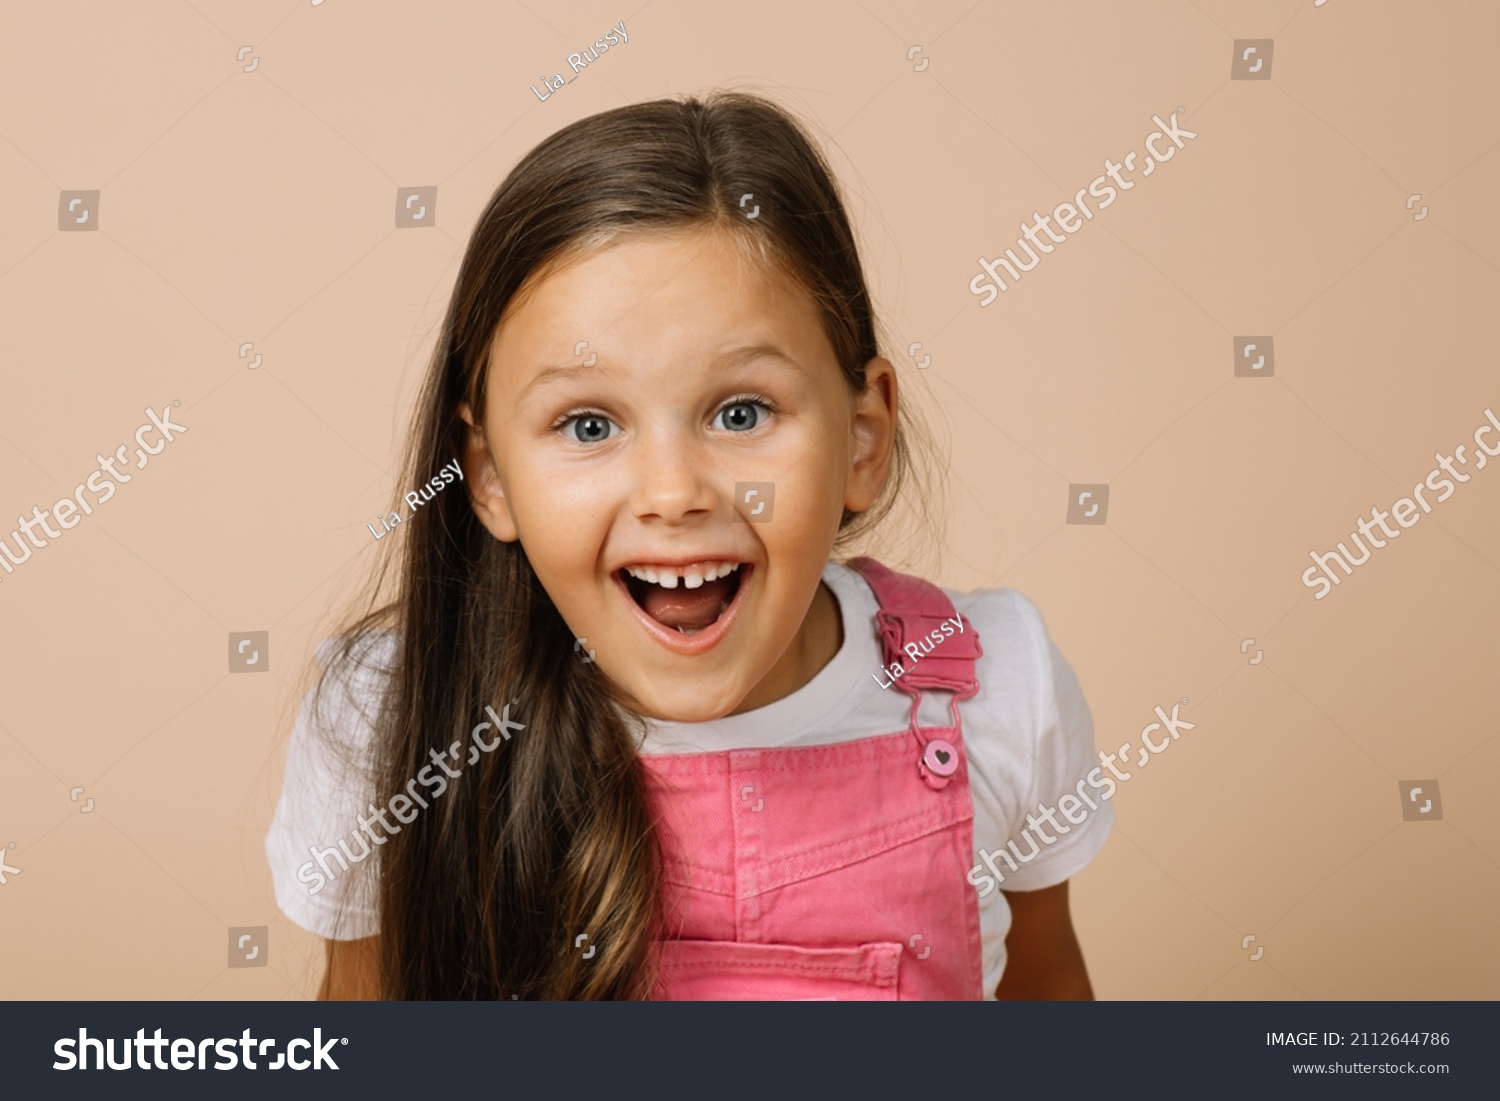 Little girl with surprised eyes, opened mouth, blissful smile with teeth and raised eyebrows looking at camera wearing bright pink jumpsuit and white t-shirt on beige background. #2112644786